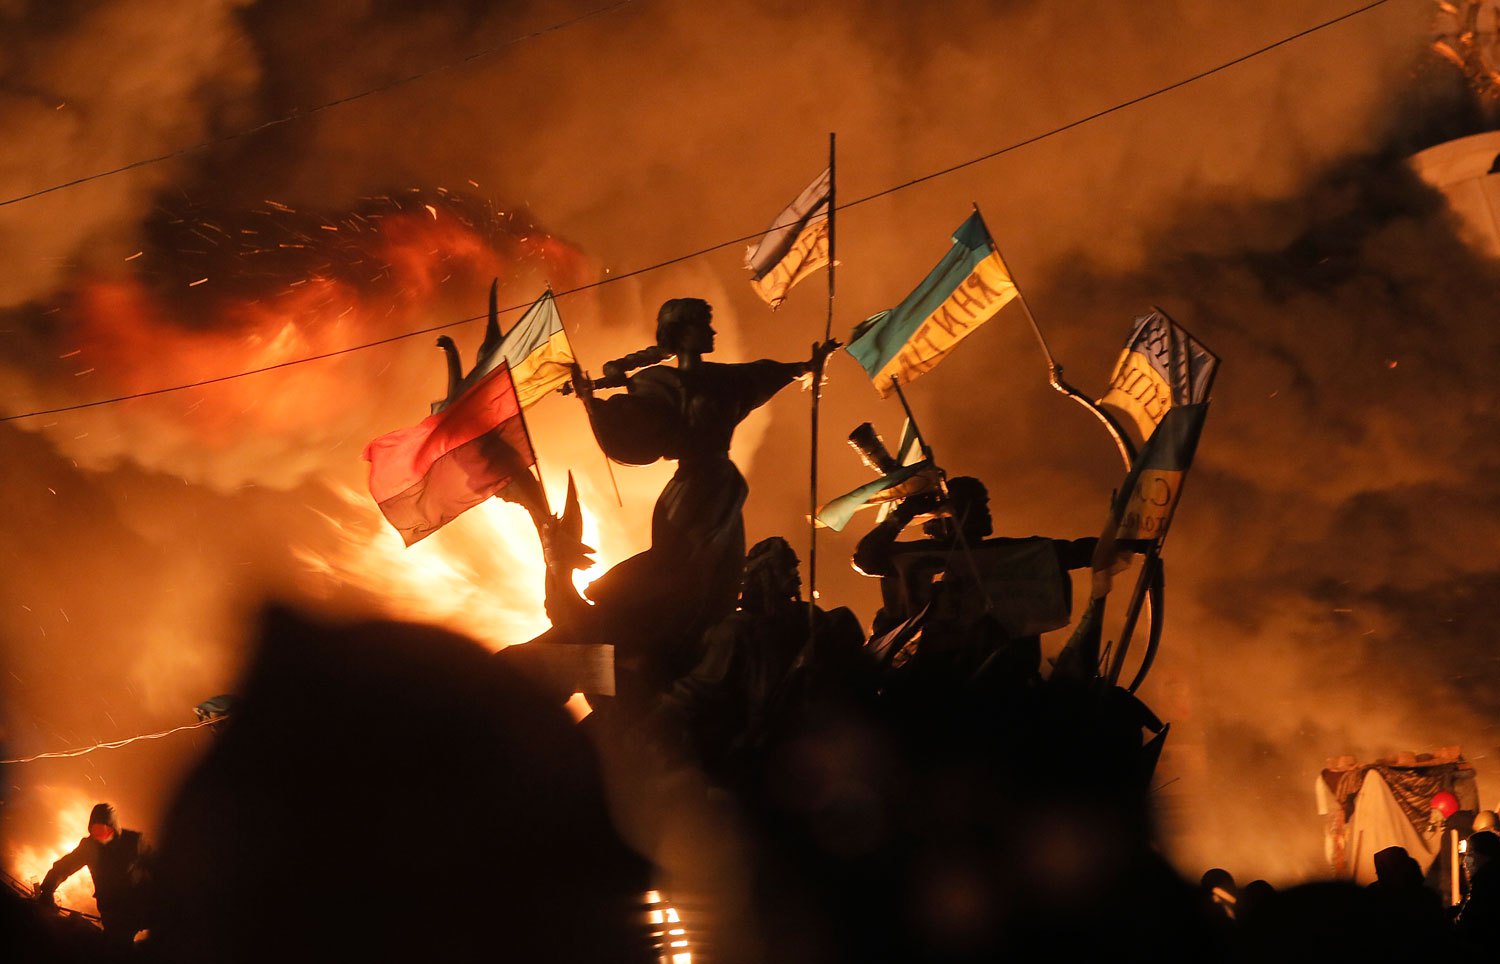 Monuments to Kiev's founders burn as anti-government protesters clash with riot police in Kiev's Independence Square, Feb. 18, 2014.